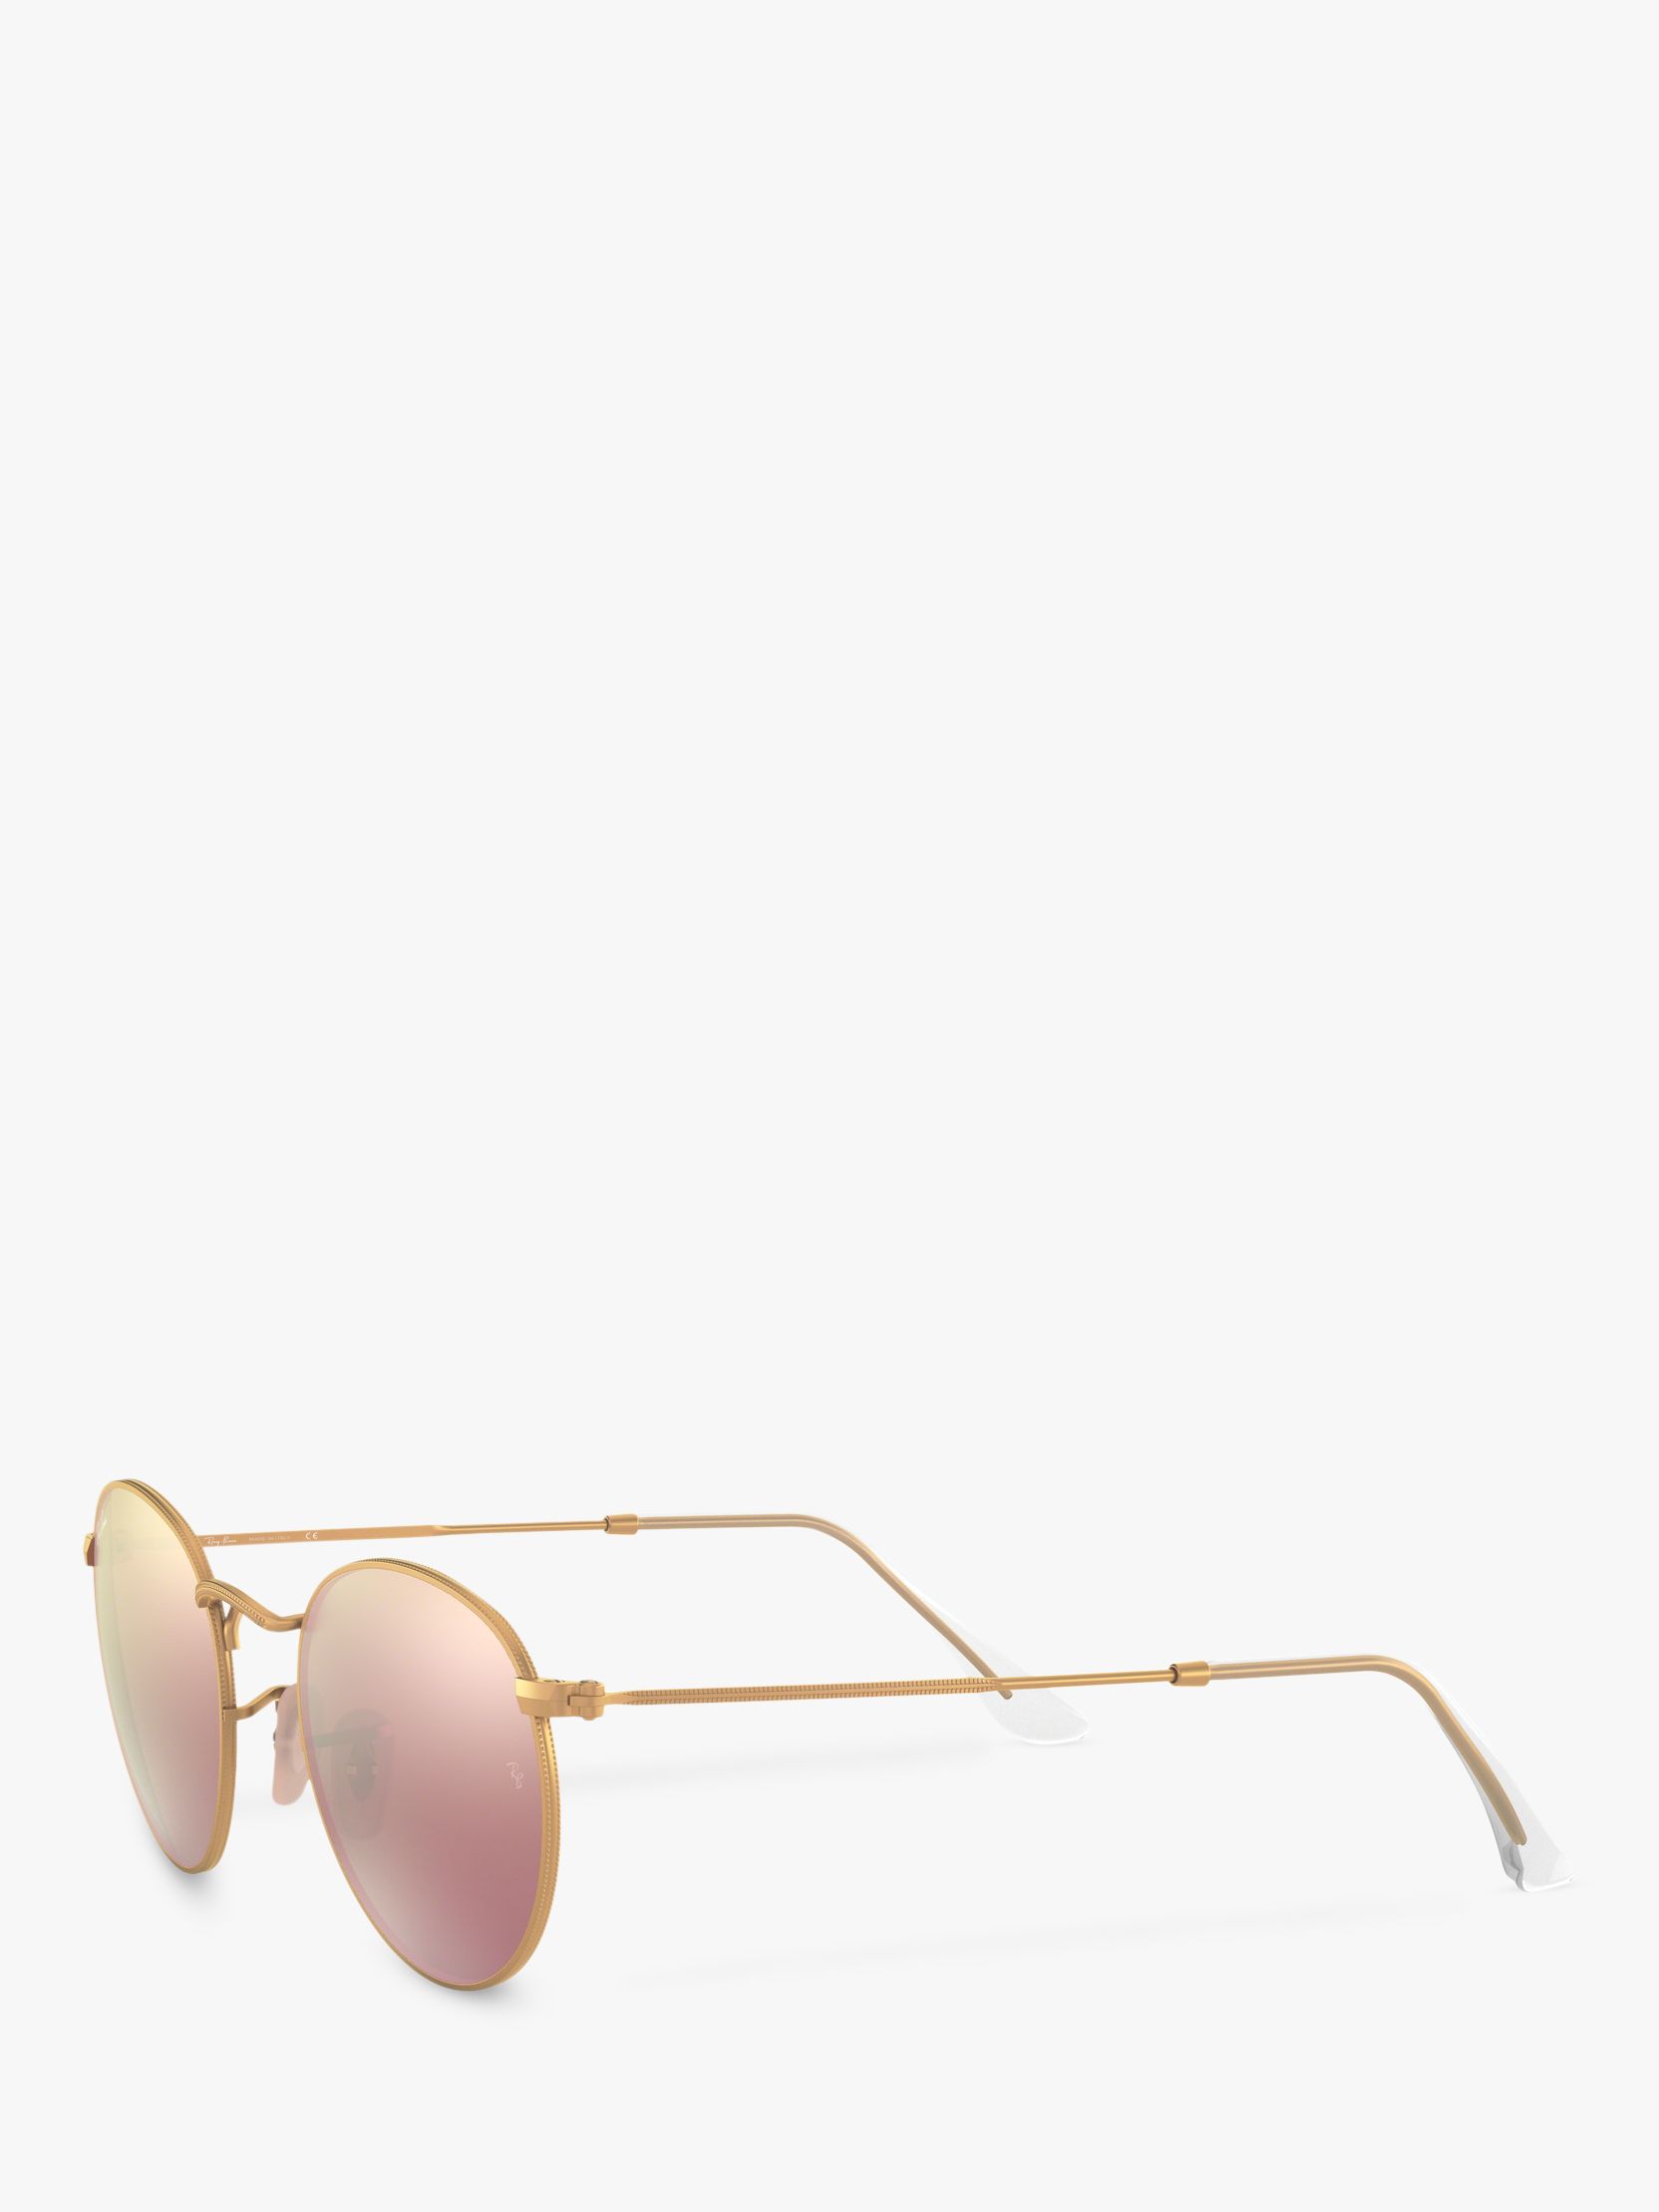 Buy Ray-Ban RB3447 Men's Round Flash Sunglasses, Gold/Mirror Pink Online at johnlewis.com